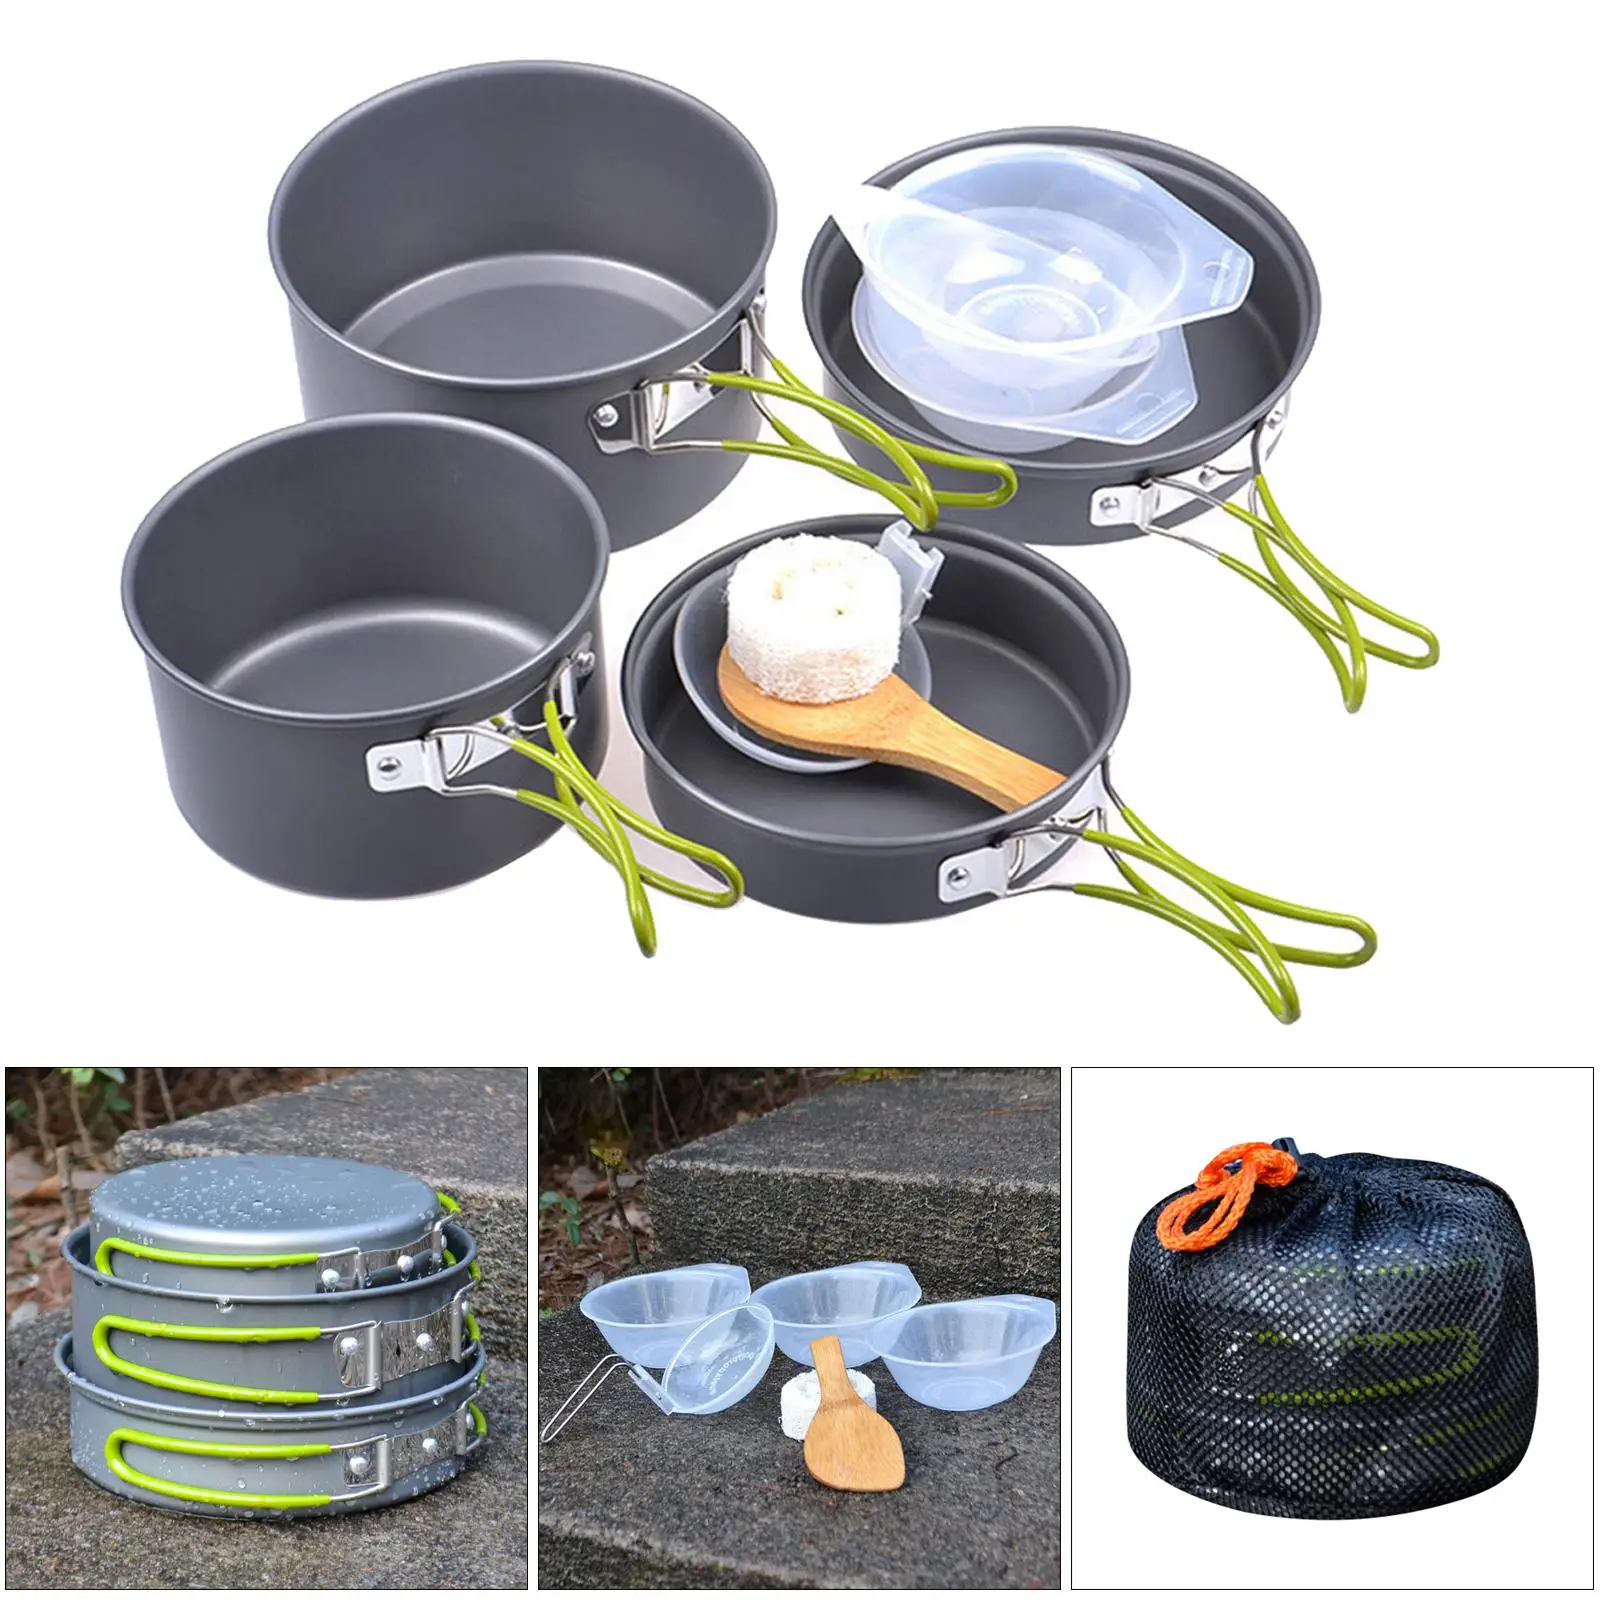 11in1 Portable Outdoor Camping Cookware Kit Hiking Lightweight Aluminium Cooking Spoon Set Backpacking Gear